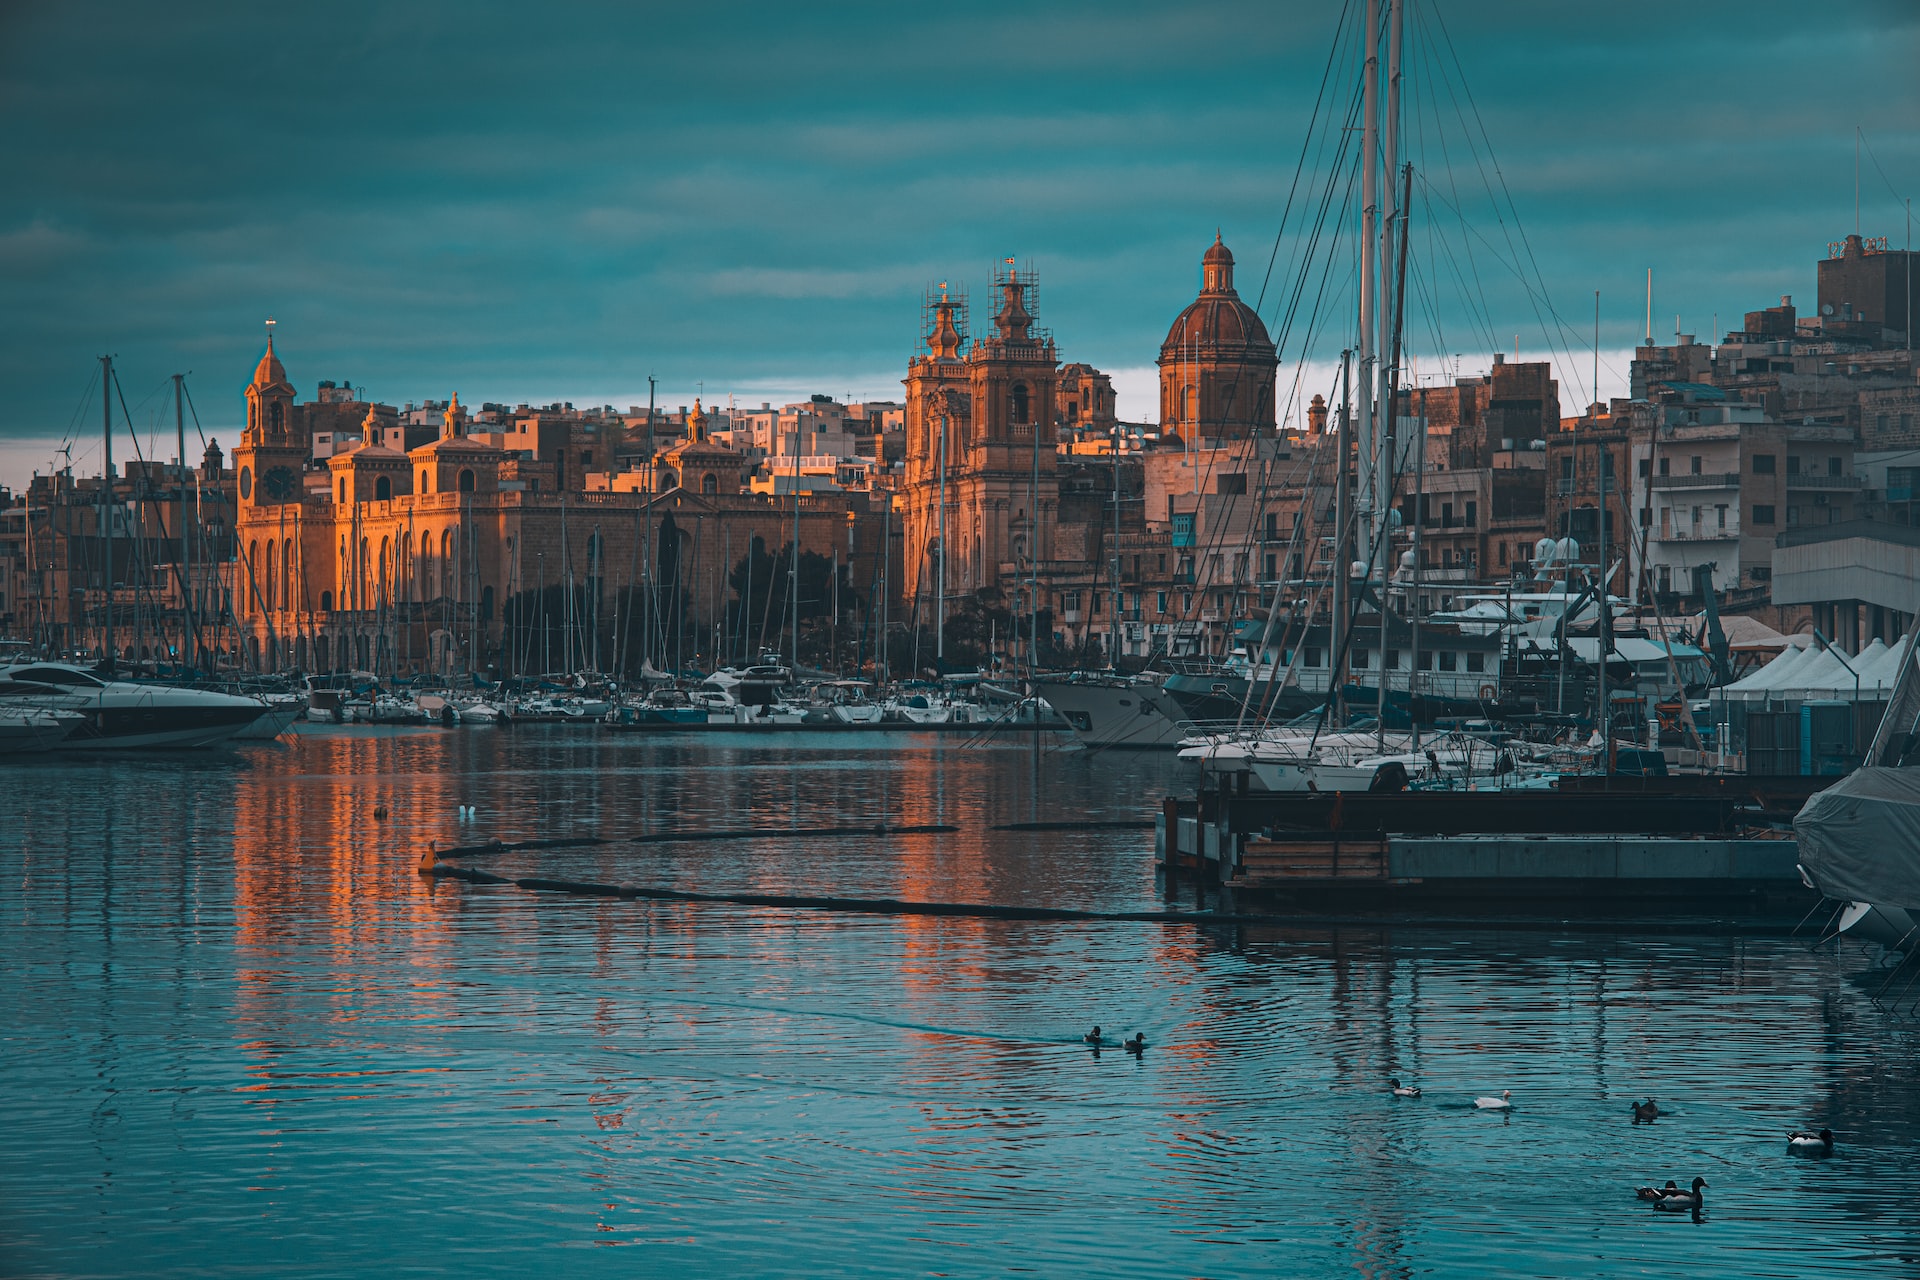 Malta finally introduces formal Transfer Pricing Rules